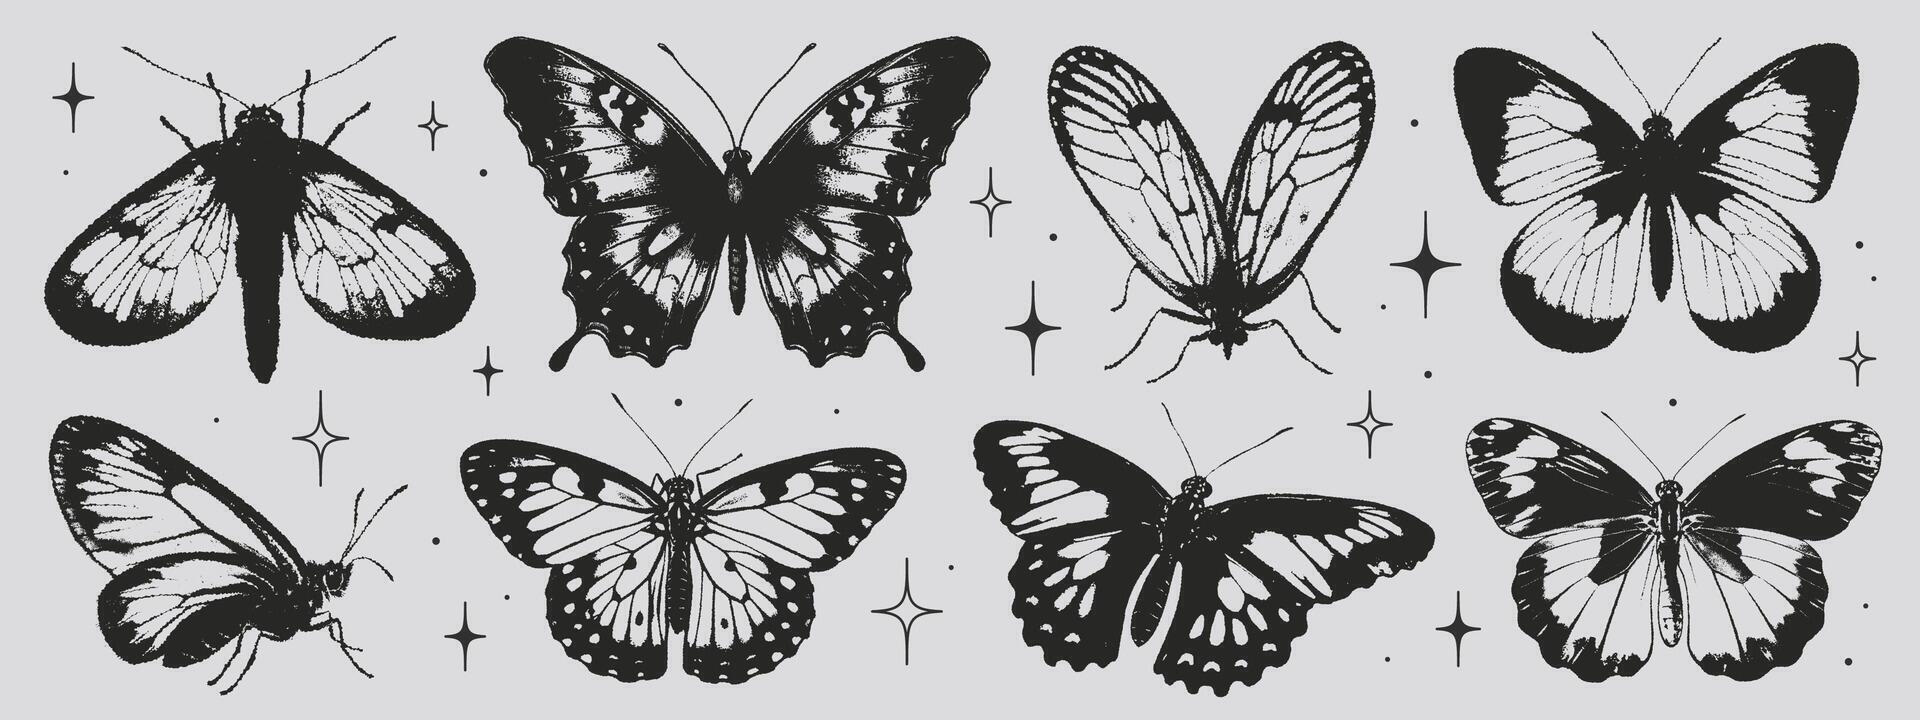 Butterflies of black wings in the style of grunge stamp and organic shapes. Y2k aesthetic, tattoo silhouette, hand drawn stickers. Vector graphic in trendy retro 2000s style. Grain texture butterfly